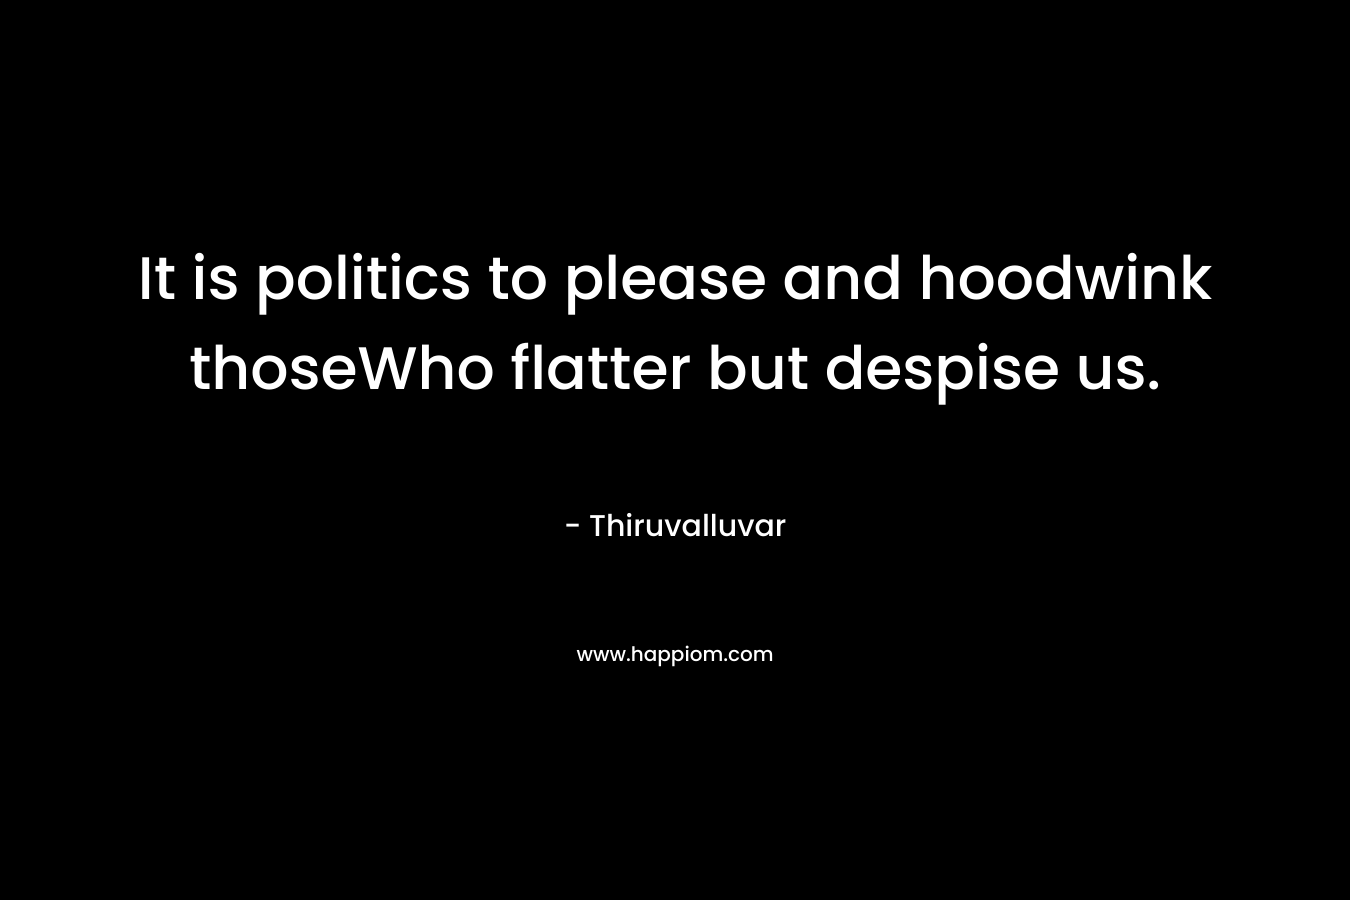 It is politics to please and hoodwink thoseWho flatter but despise us. – Thiruvalluvar